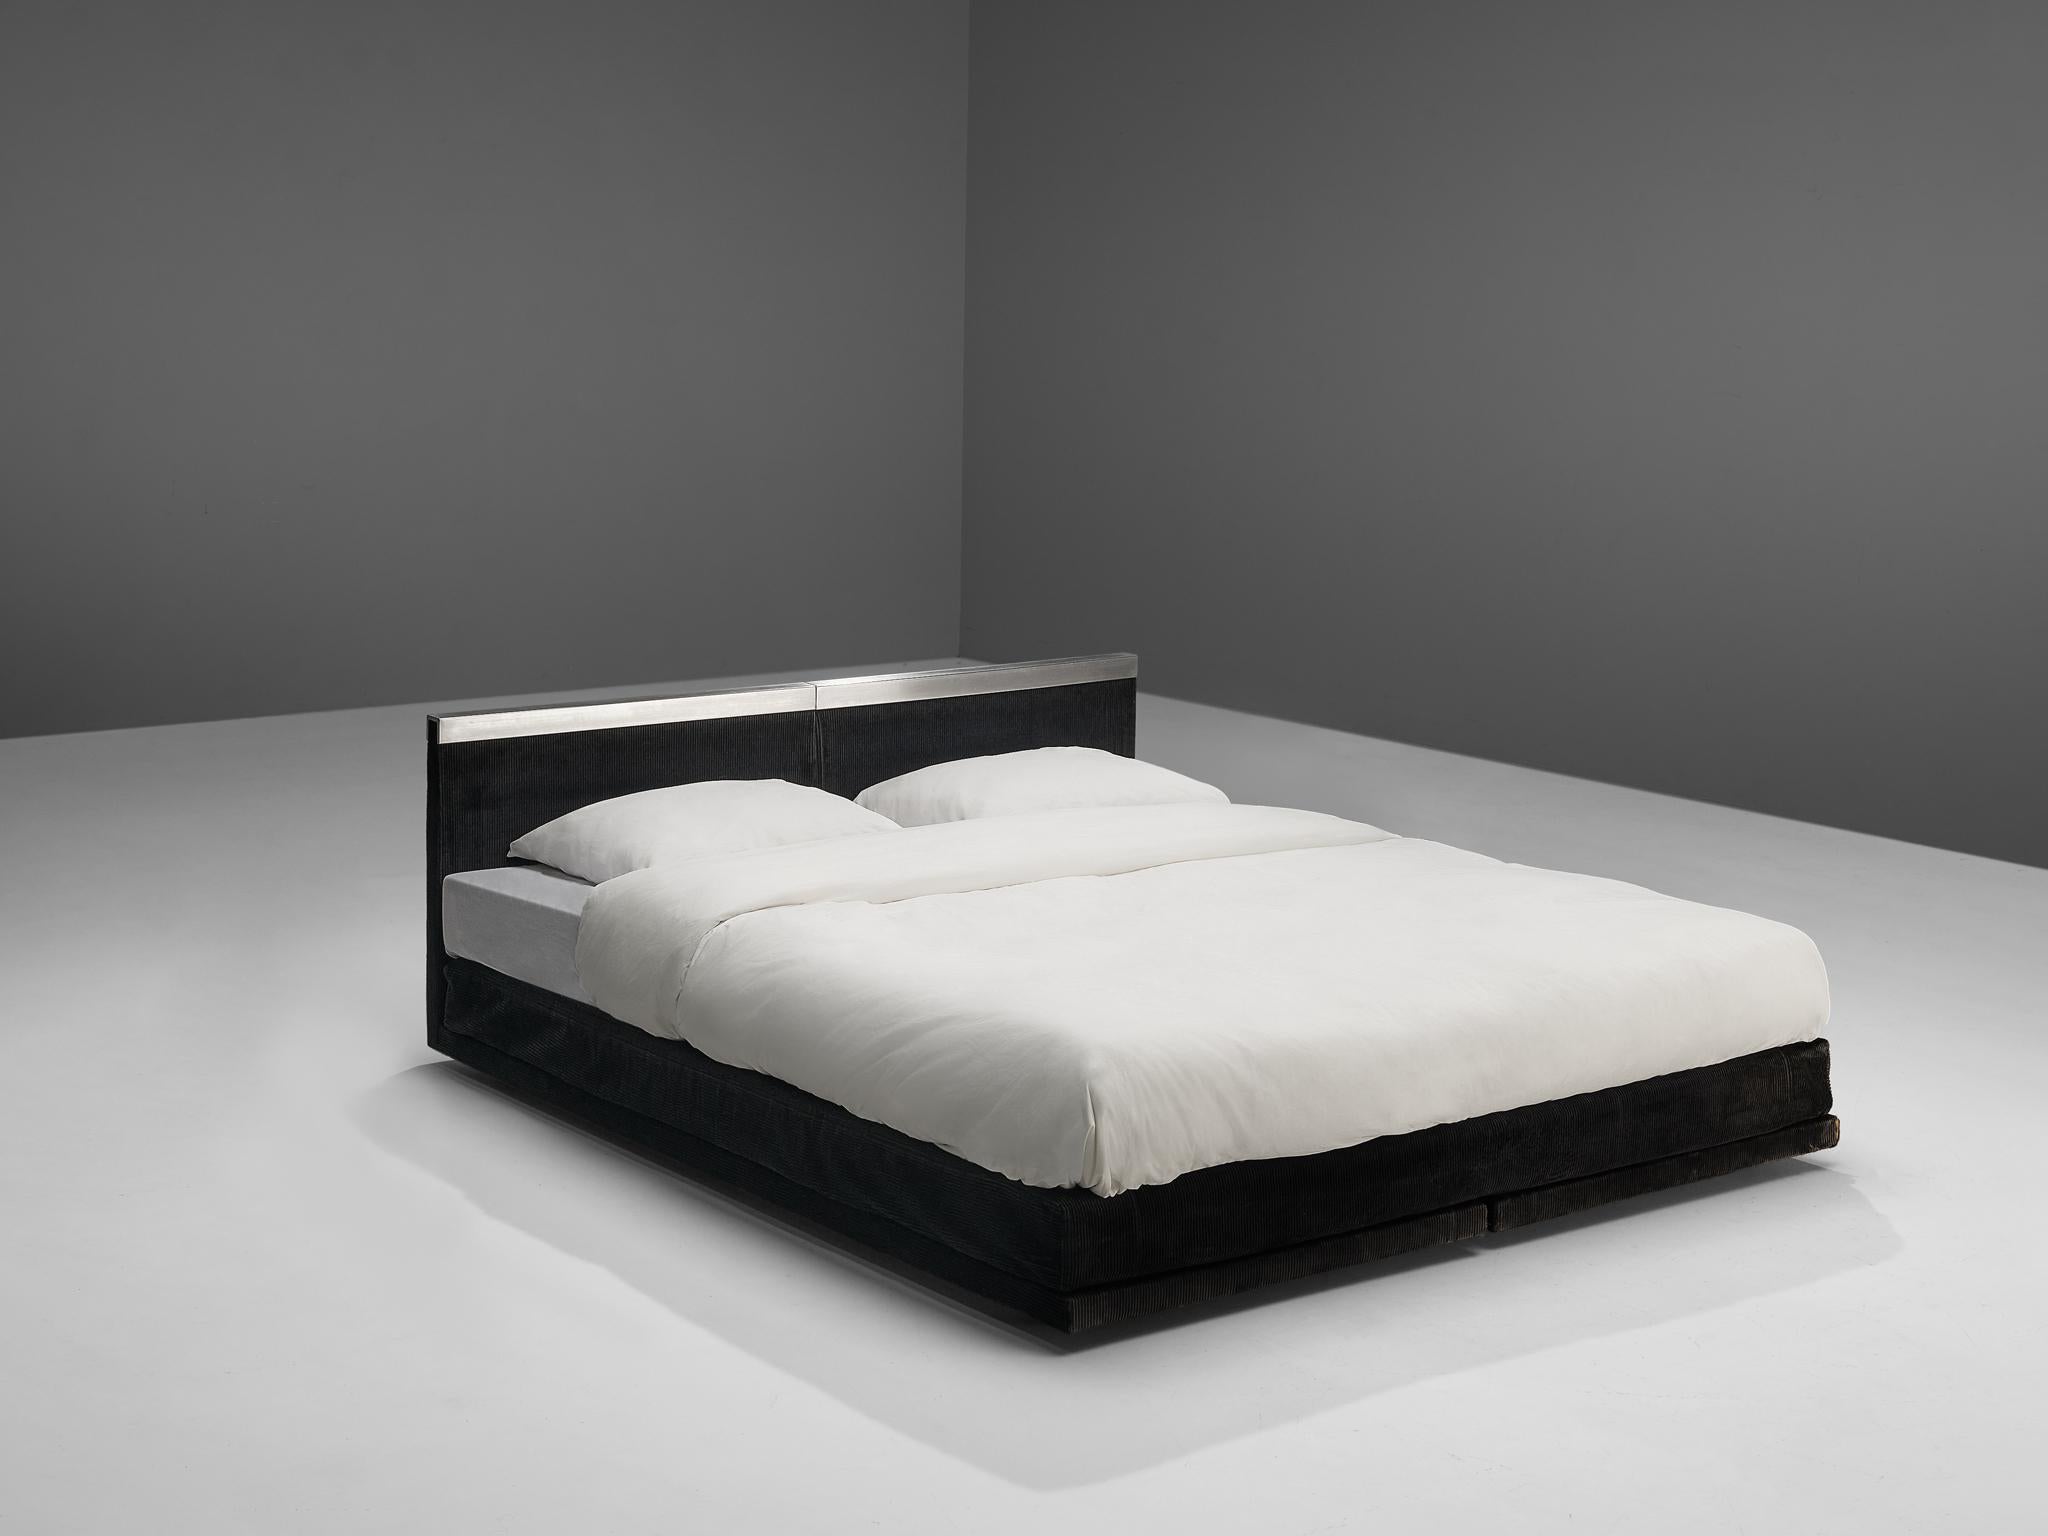 Bazzani, bed, black upholstery, aluminum, Italy, circa 1975

Unique custom made bed in black upholstery with aluminum detailing on the headrest. This bed has been manufactured by Bazzani for the home of Mariangela Johnson and Roberto Pasqualetti